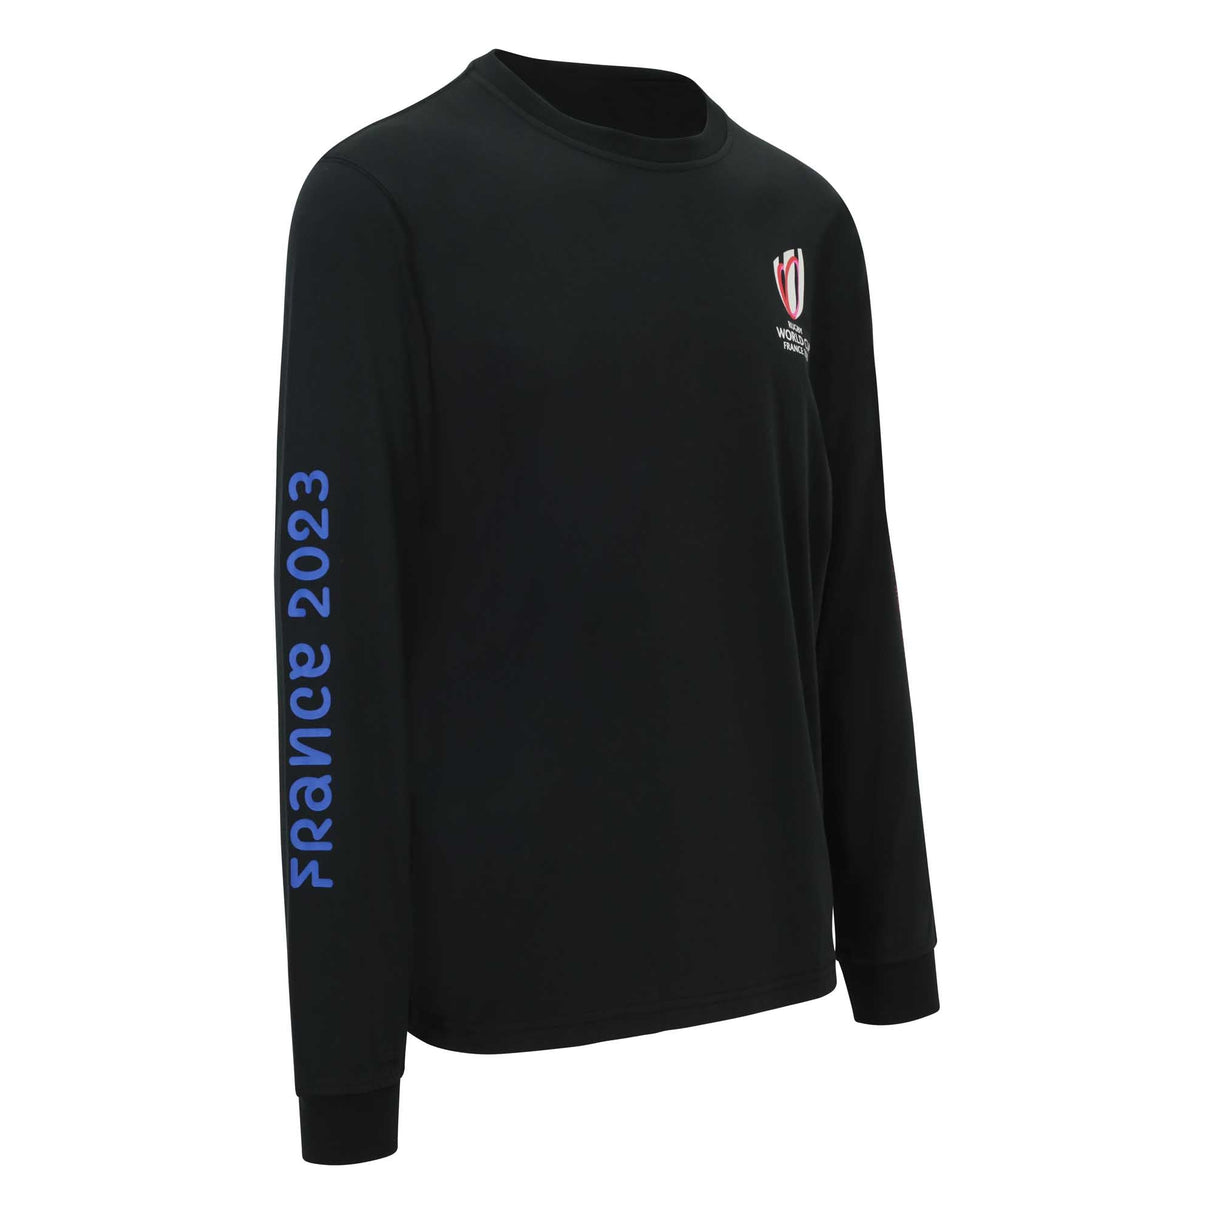 20 Unions L/S Venue T-Shirt - Black – Absolute Rugby